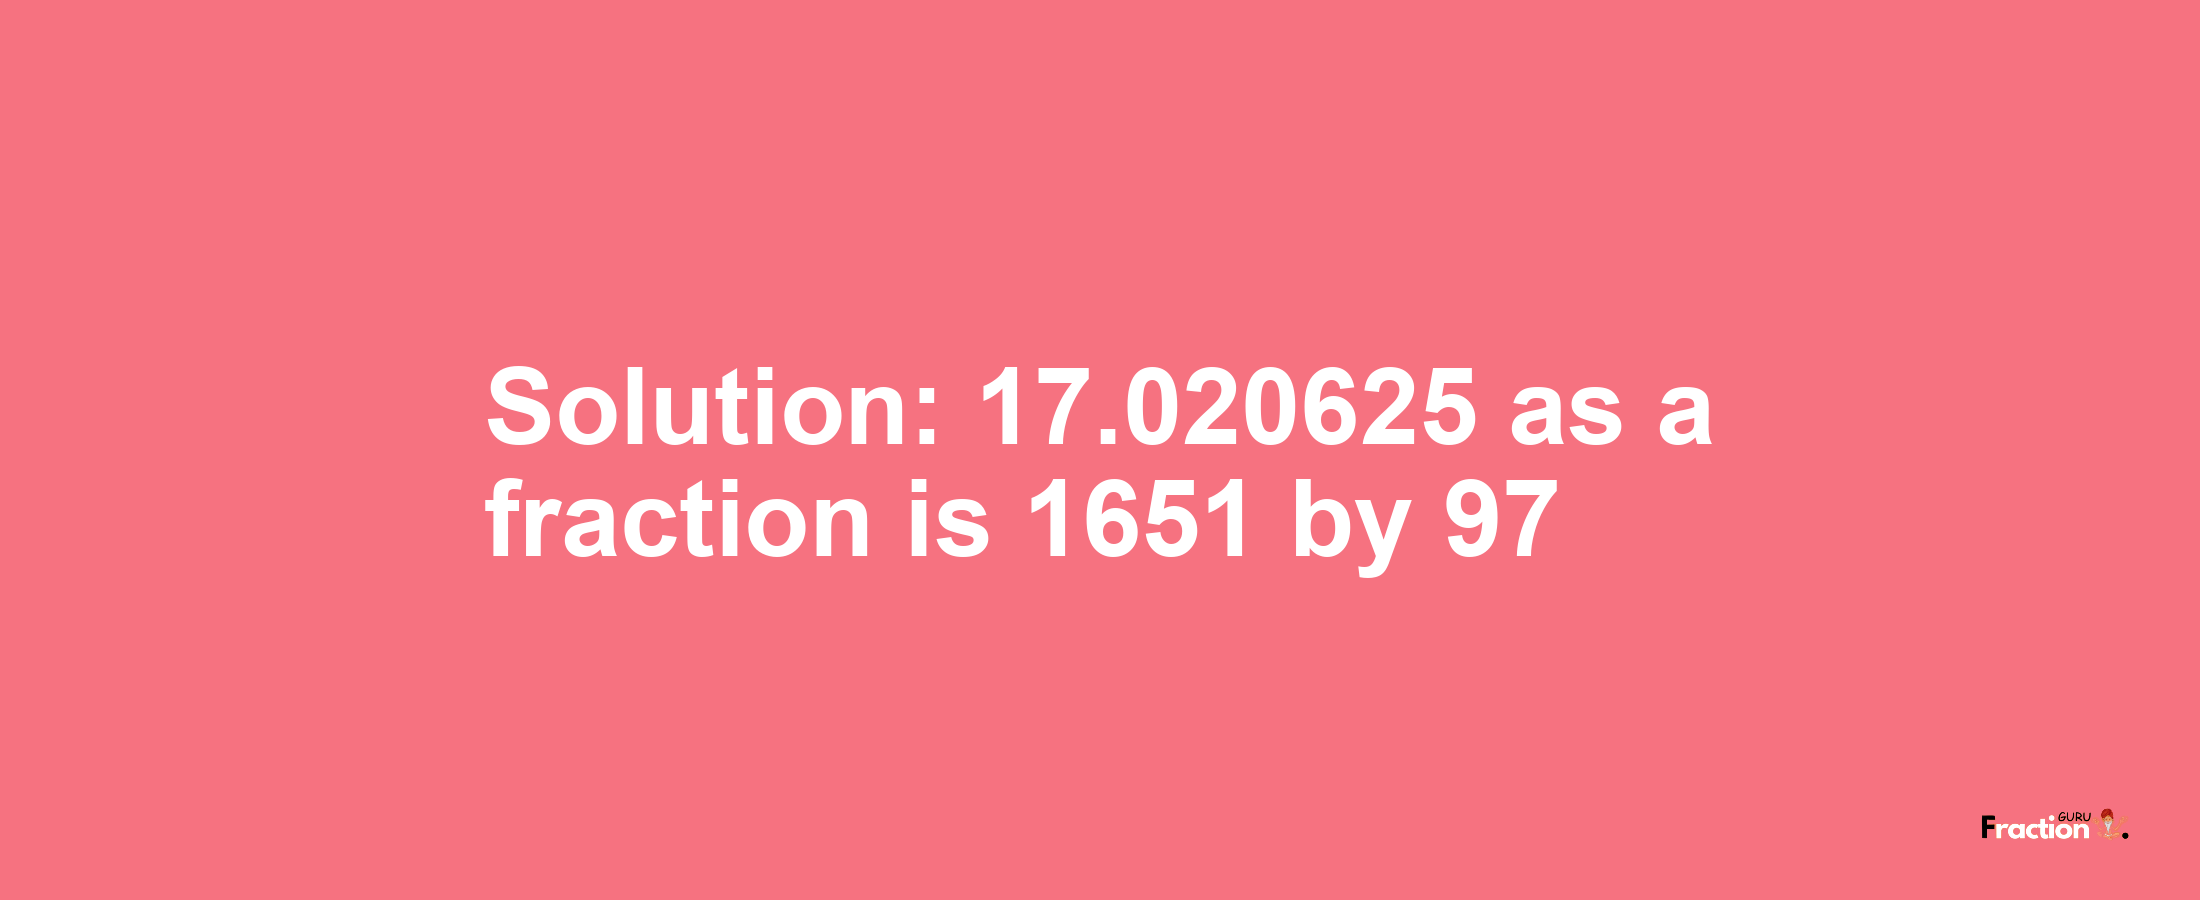 Solution:17.020625 as a fraction is 1651/97